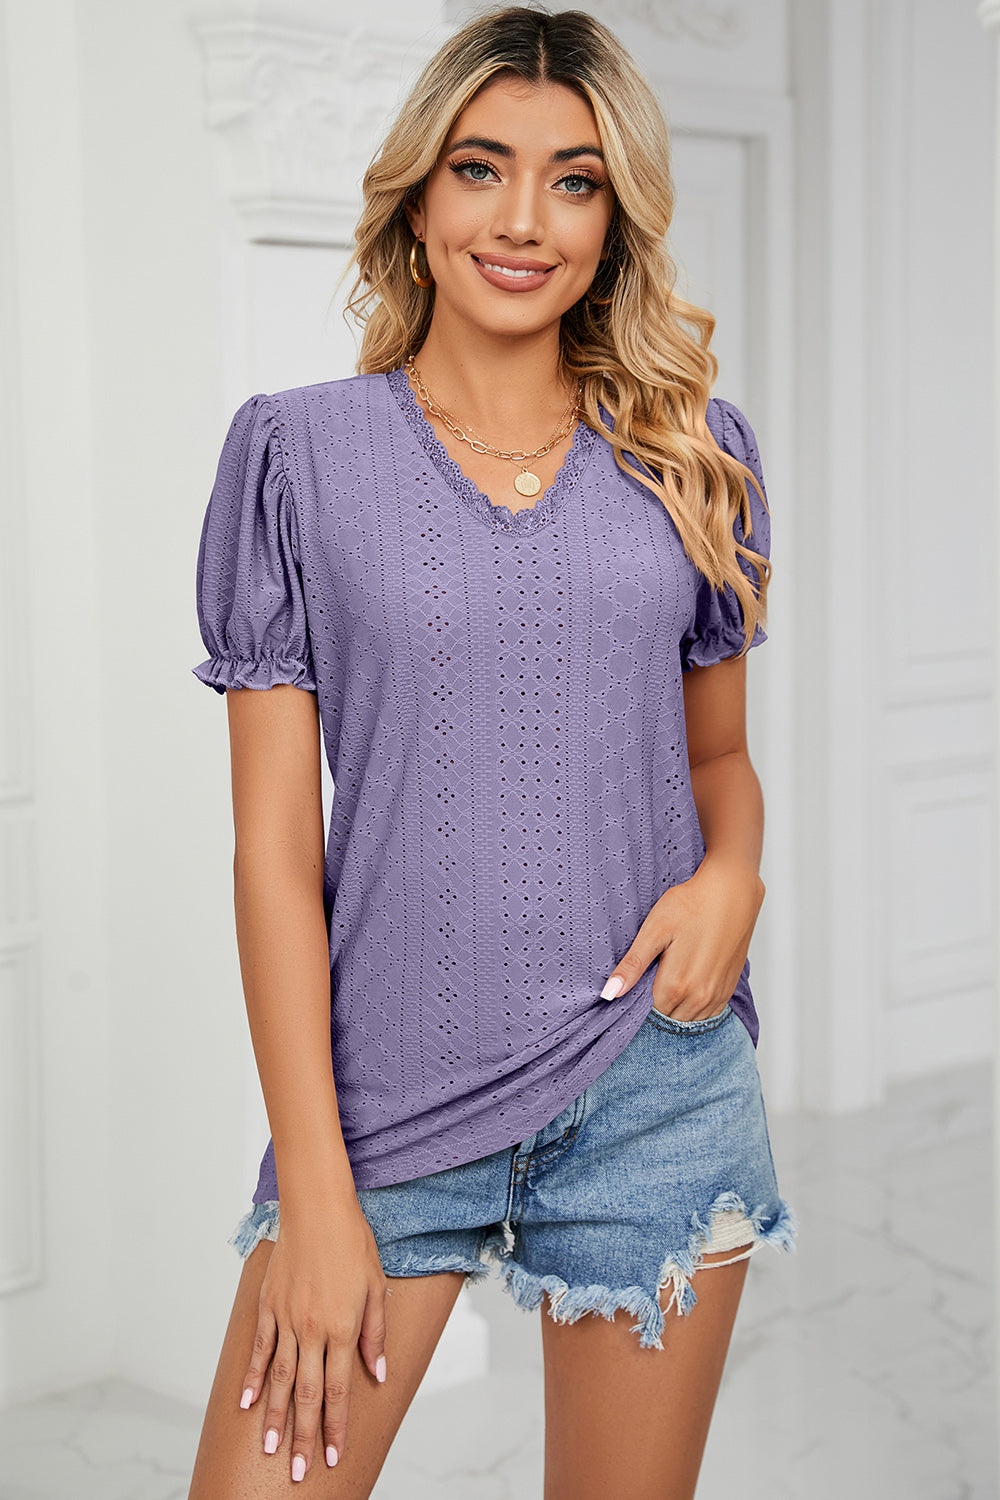 Chic Eyelet V-Neck Top in 6 colors, perfect for any occasion. Lightweight & stylish - your go-to summer essential for day-to-night looks.